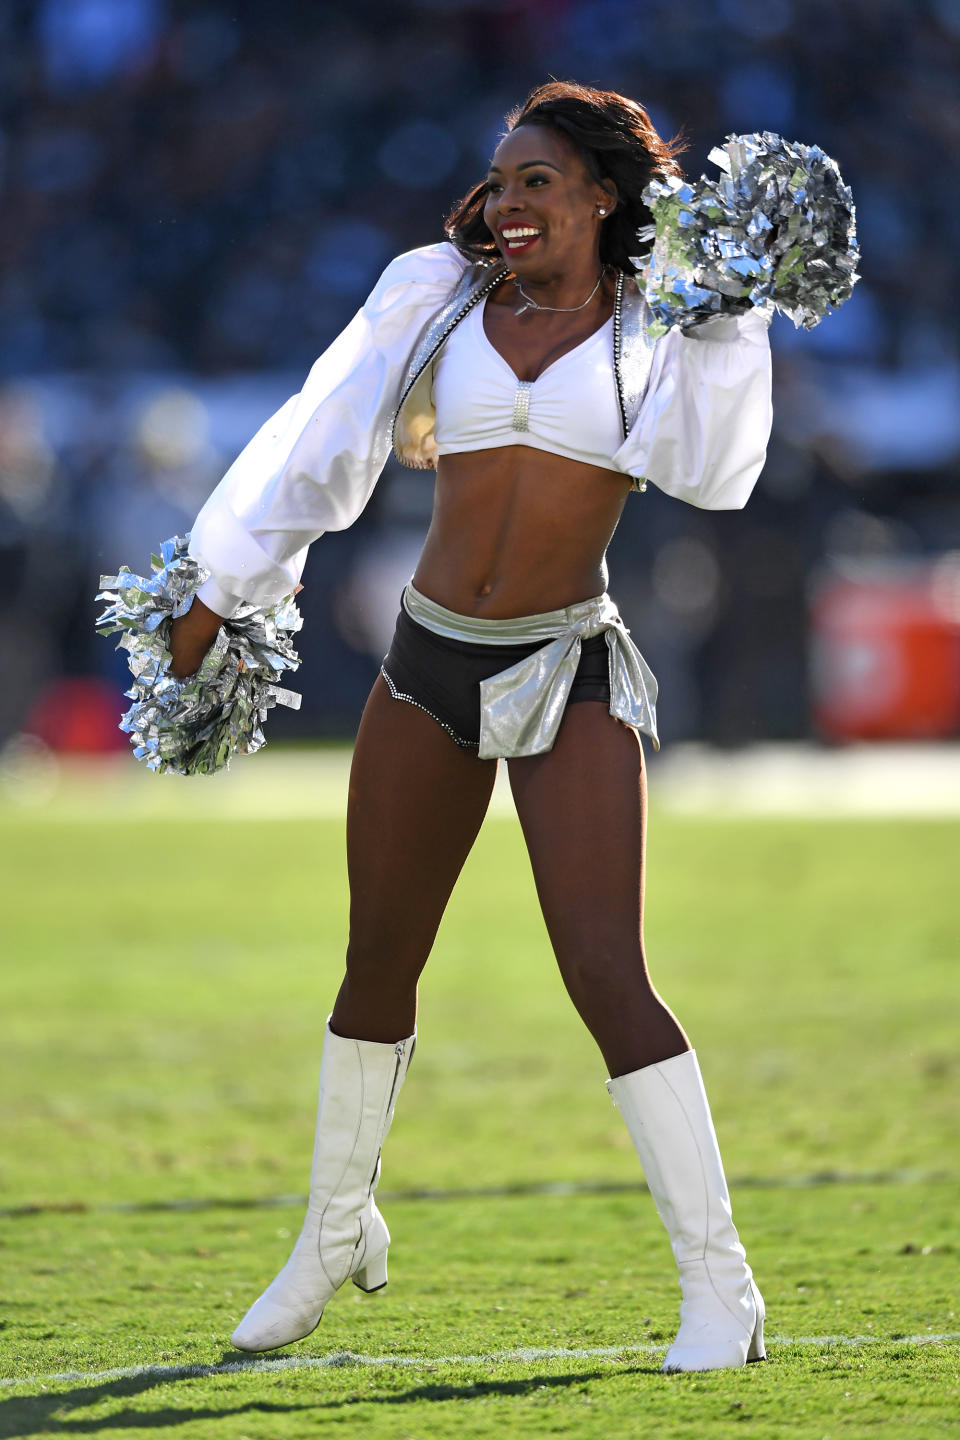 <p>An Oakland Raiders Raiderette performs during their NFL game against the New York Giants at Oakland-Alameda County Coliseum on December 3, 2017 in Oakland, California. (Photo by Thearon W. Henderson/Getty Images) </p>